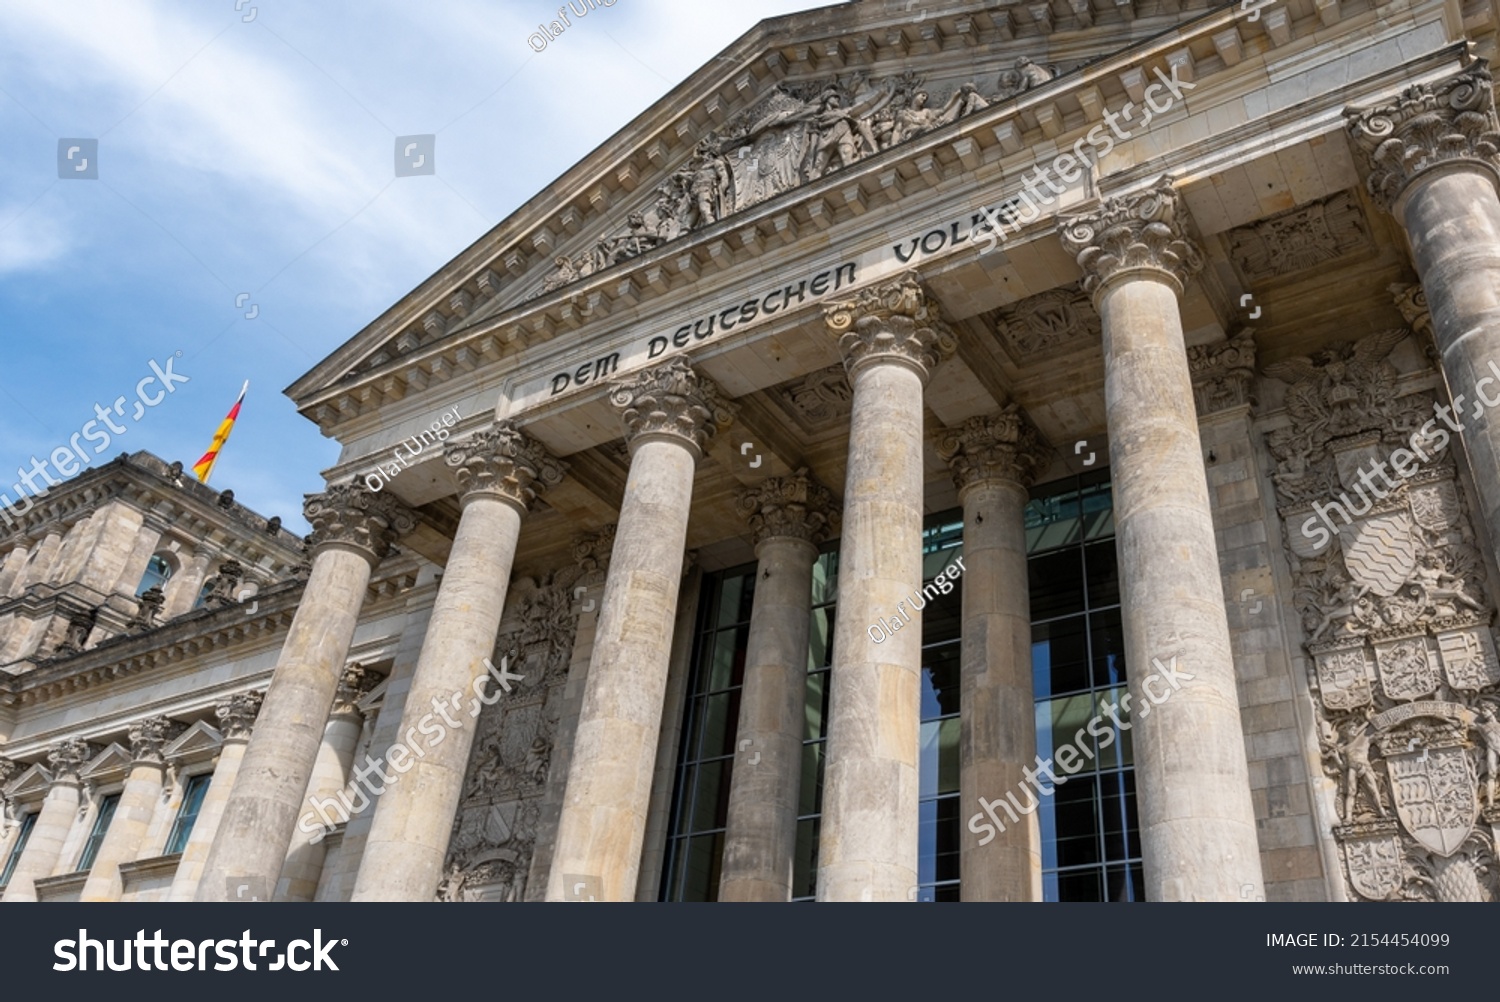 The Reichstag building (Bundestag) in Berlin, Germany, meeting place of the German parliament: The inscription says: Dem Deutschen Volke - To the German people #2154454099